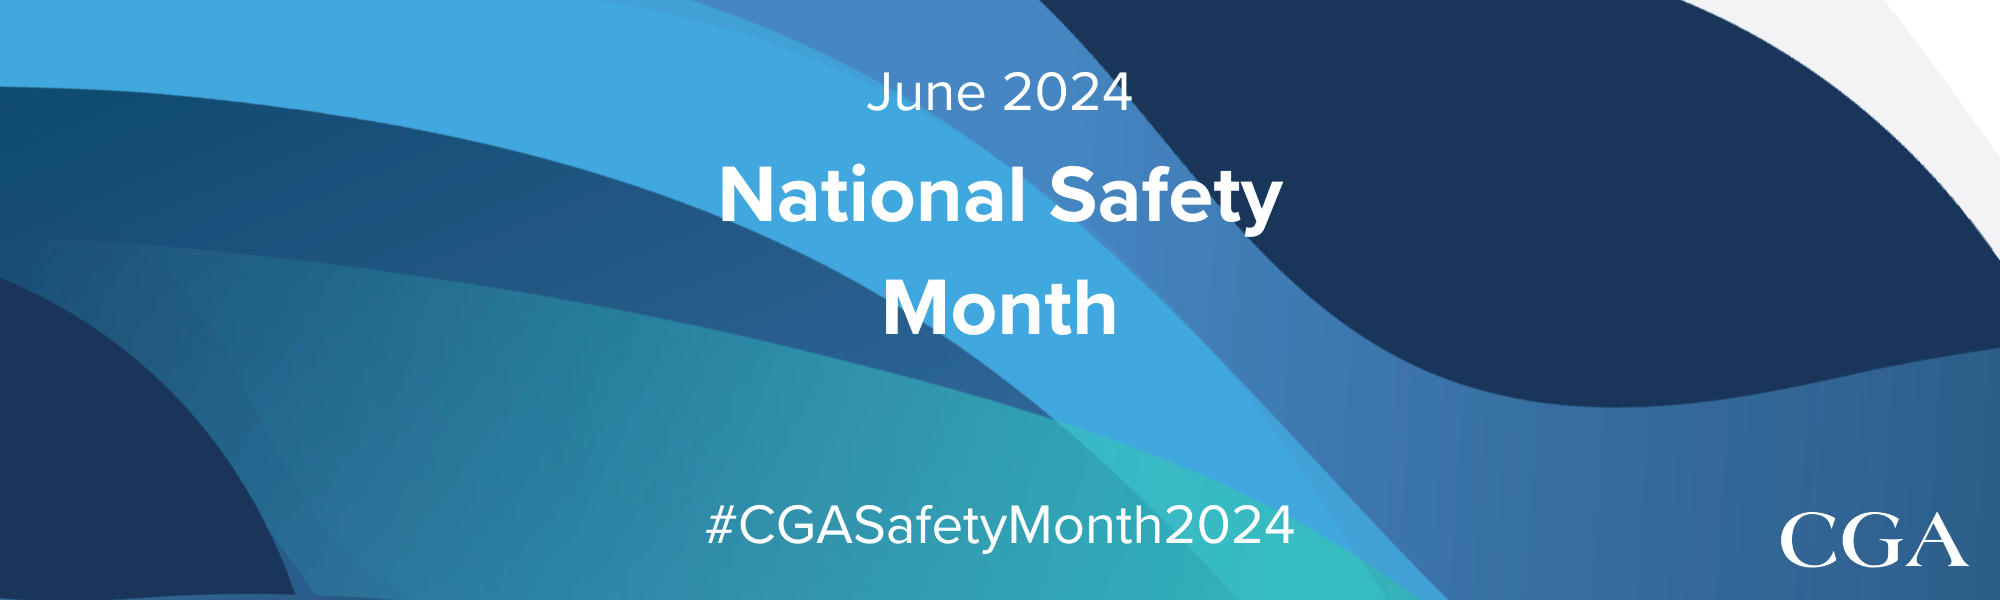 June 2024 National Safety Month cover